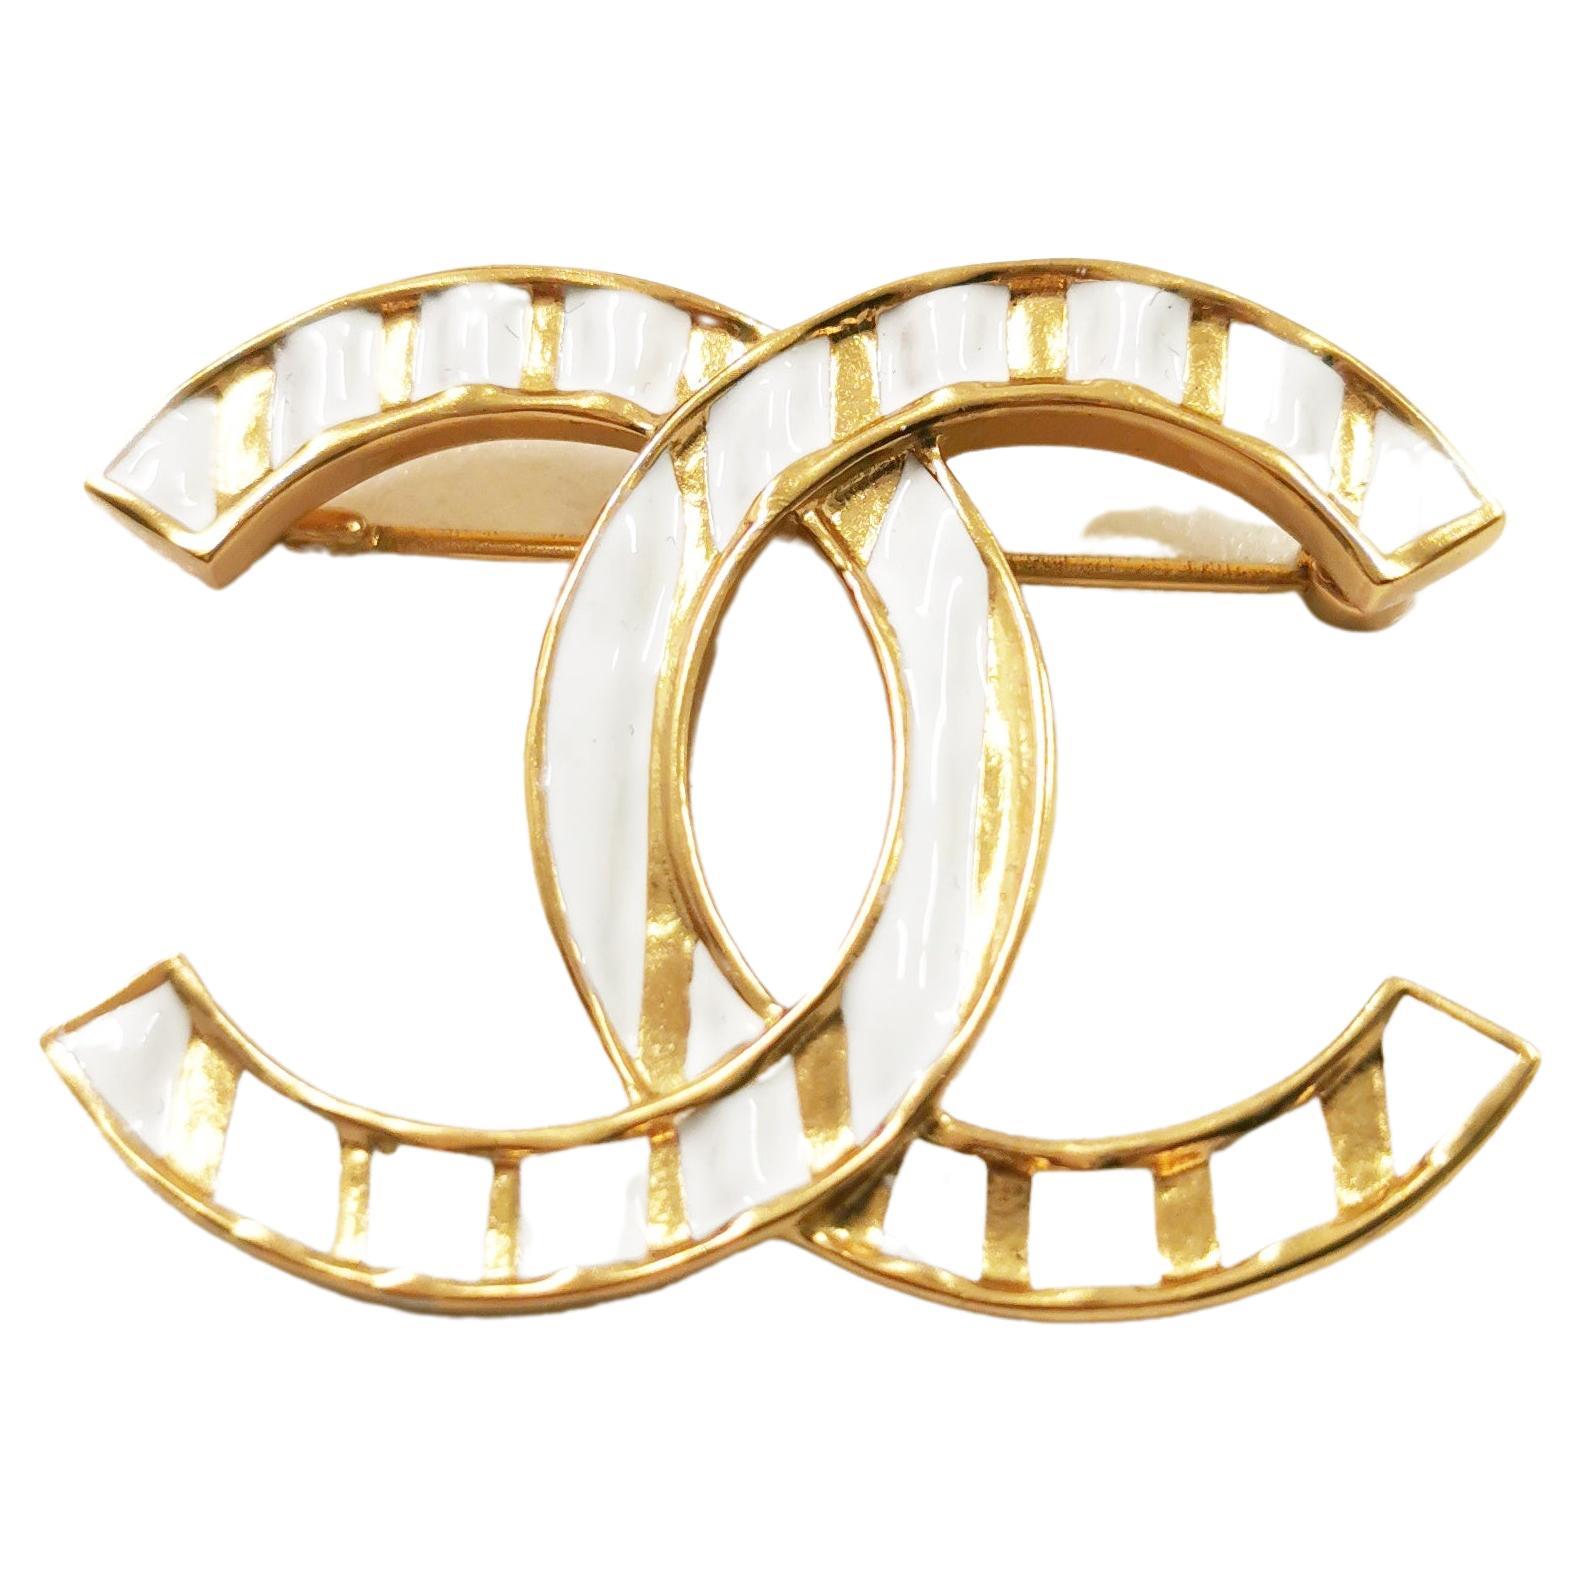 Cc pin & brooche Chanel Gold in Metal - 29947595